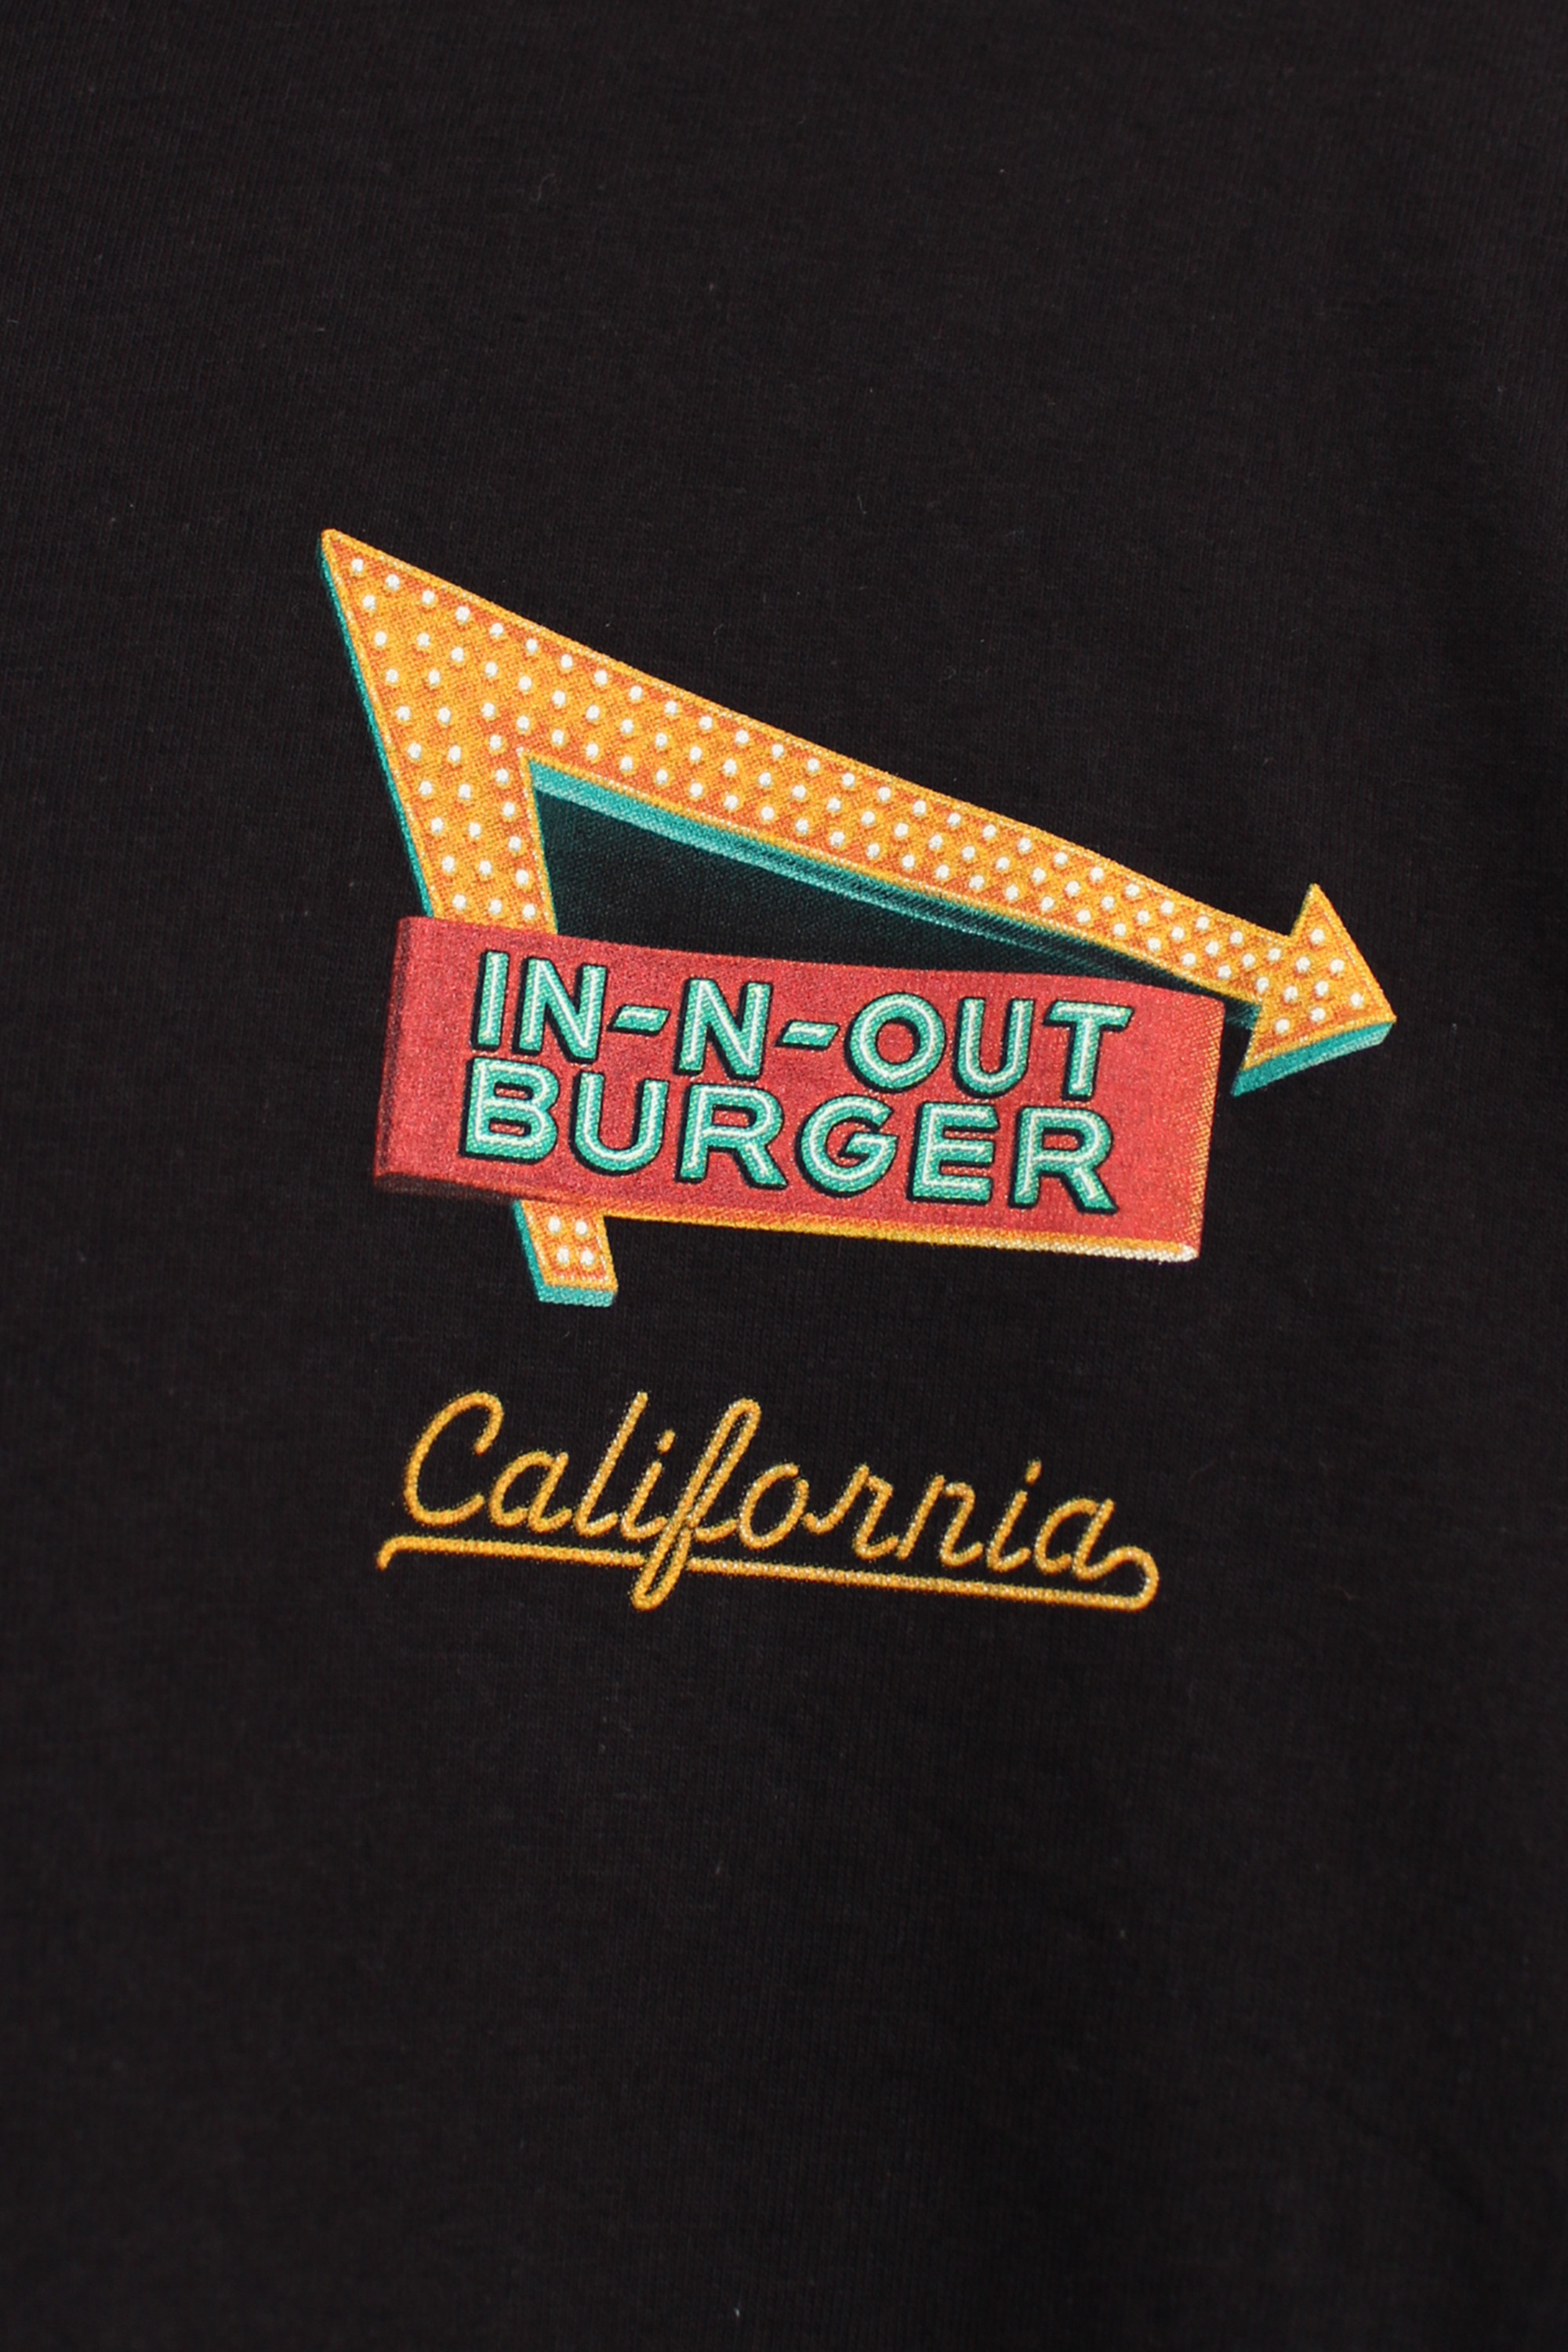 IN-N-OUT BURGER t- shirt